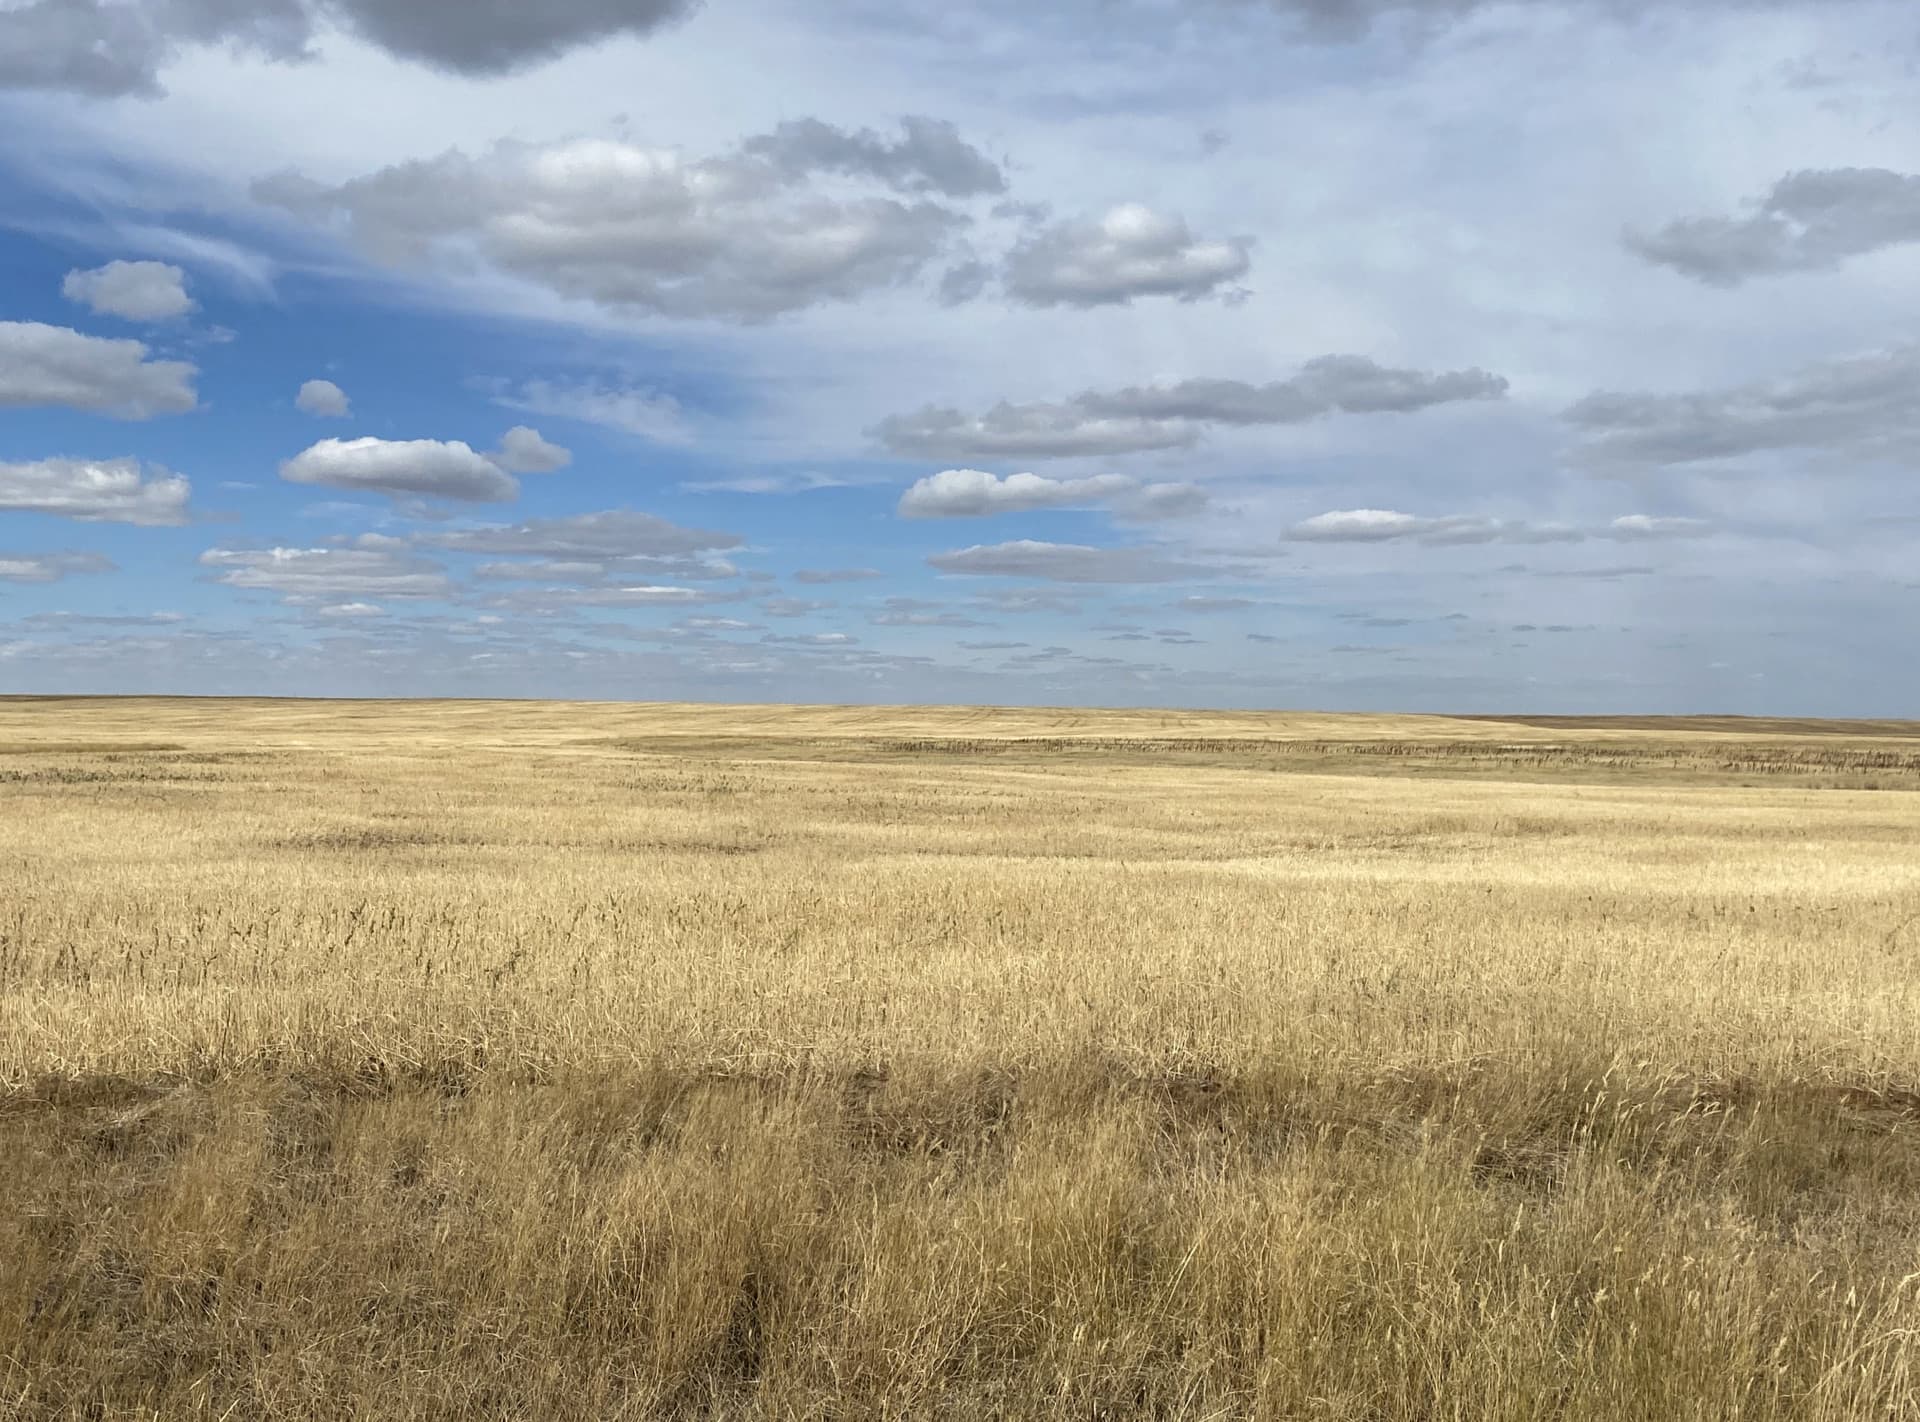 land only property for sale montana high line organic wheat farm